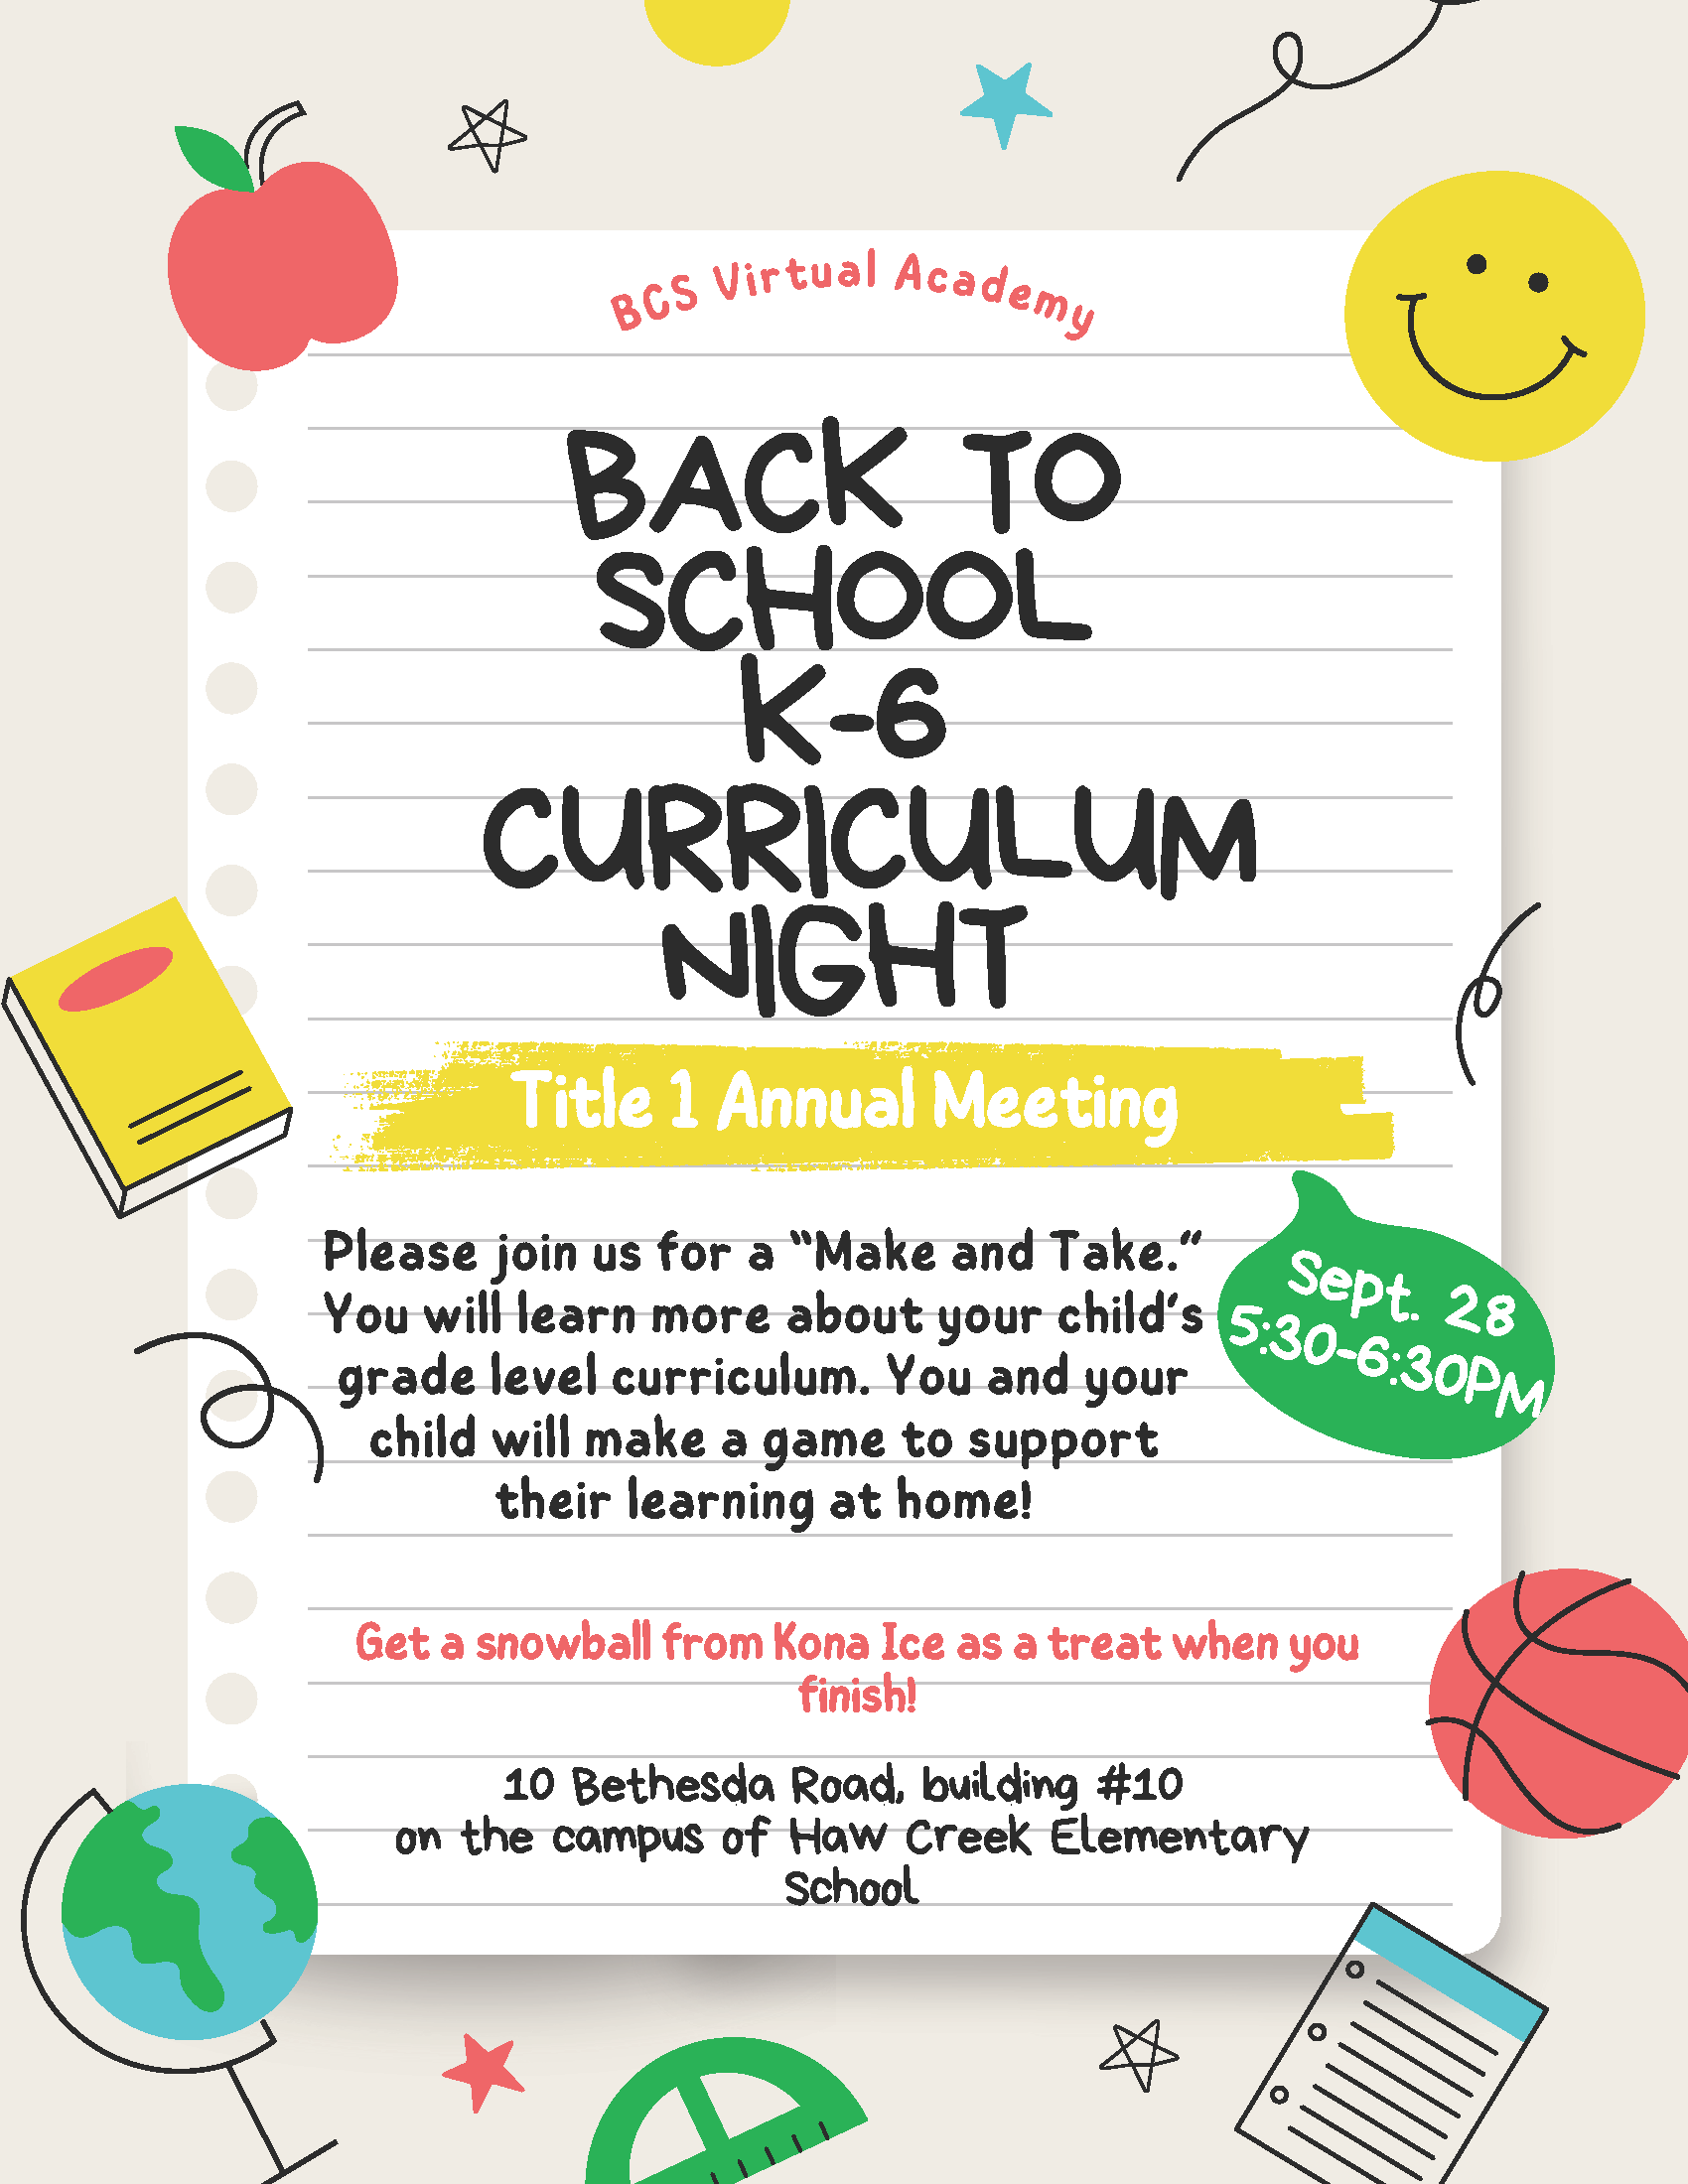 BACK TO SCHOOL  K-6  CURRICULUM  NIGHT Title 1 Annual Meeting SEPTEMBER 28 5:30-6:30